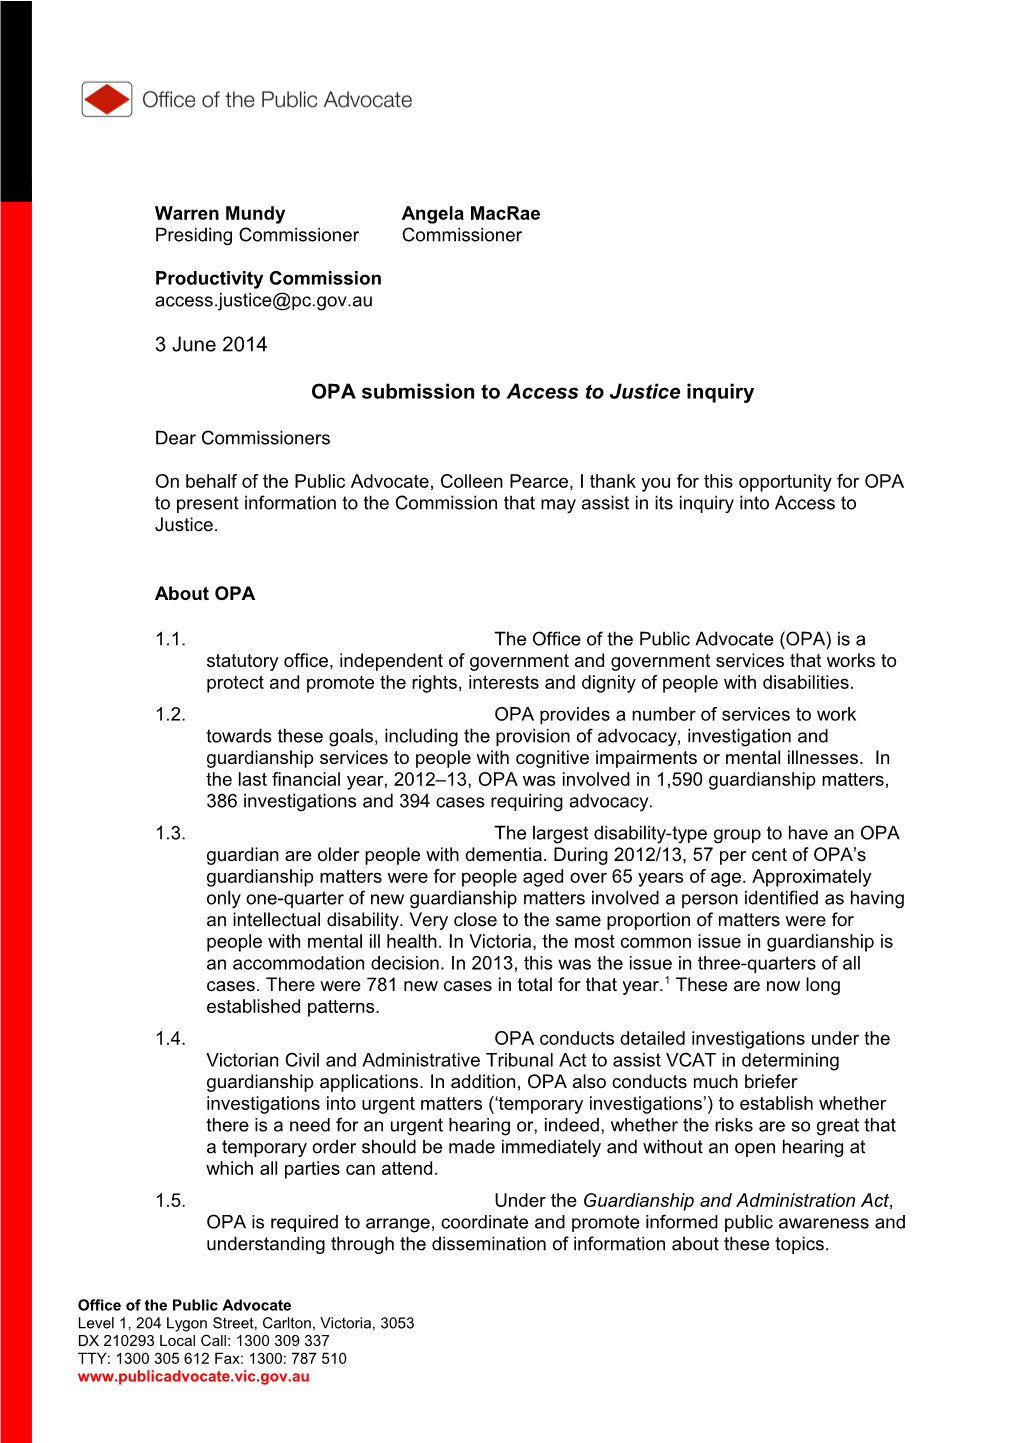 Submission DR311 - Office of the Public Advocate (Victoria) - Access to Justice Arrangements